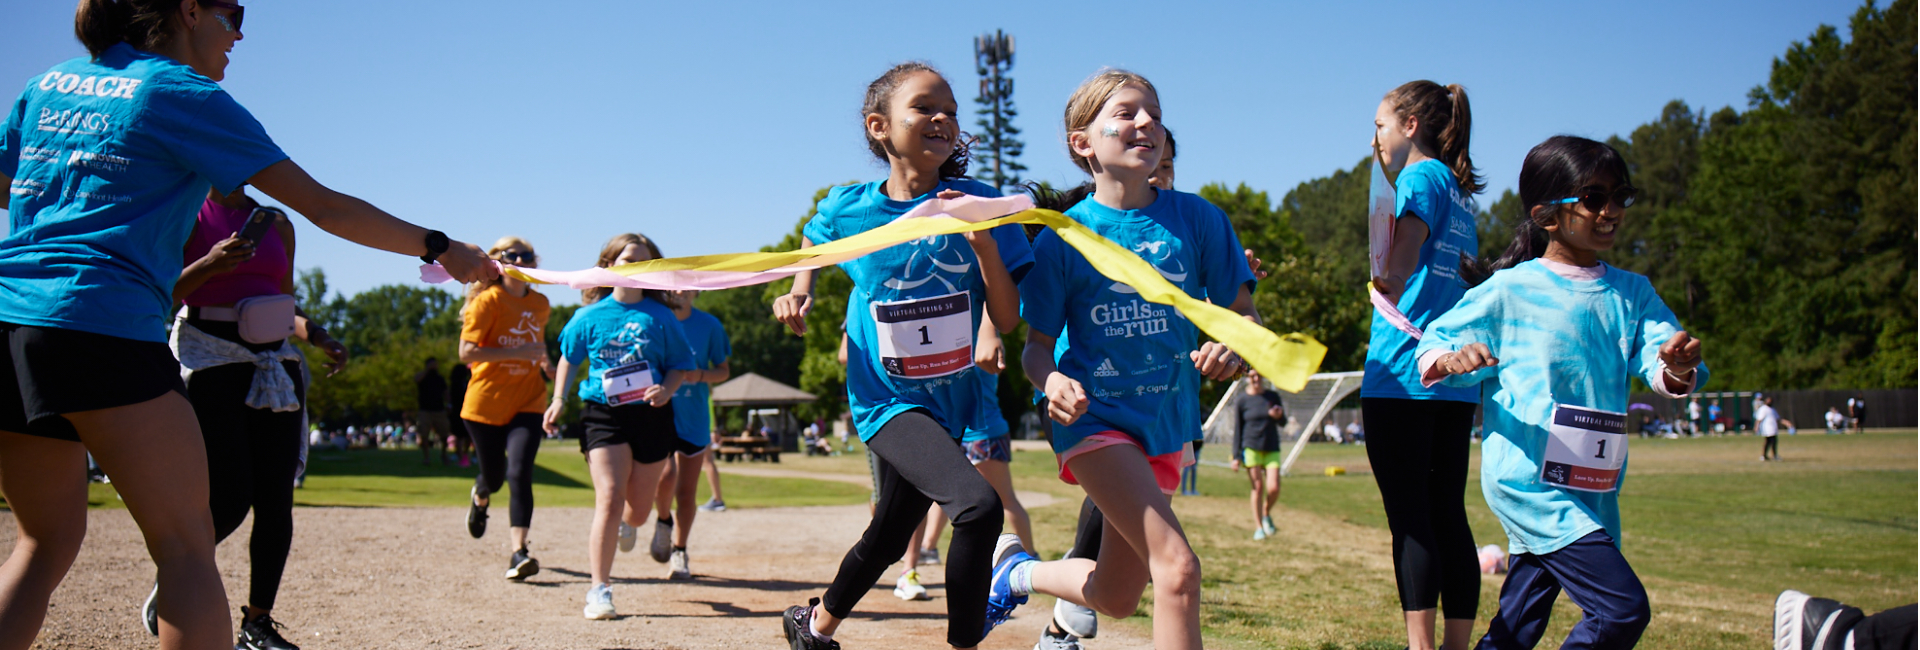 girls cross the finish line at a Girls on the Run 5K running event